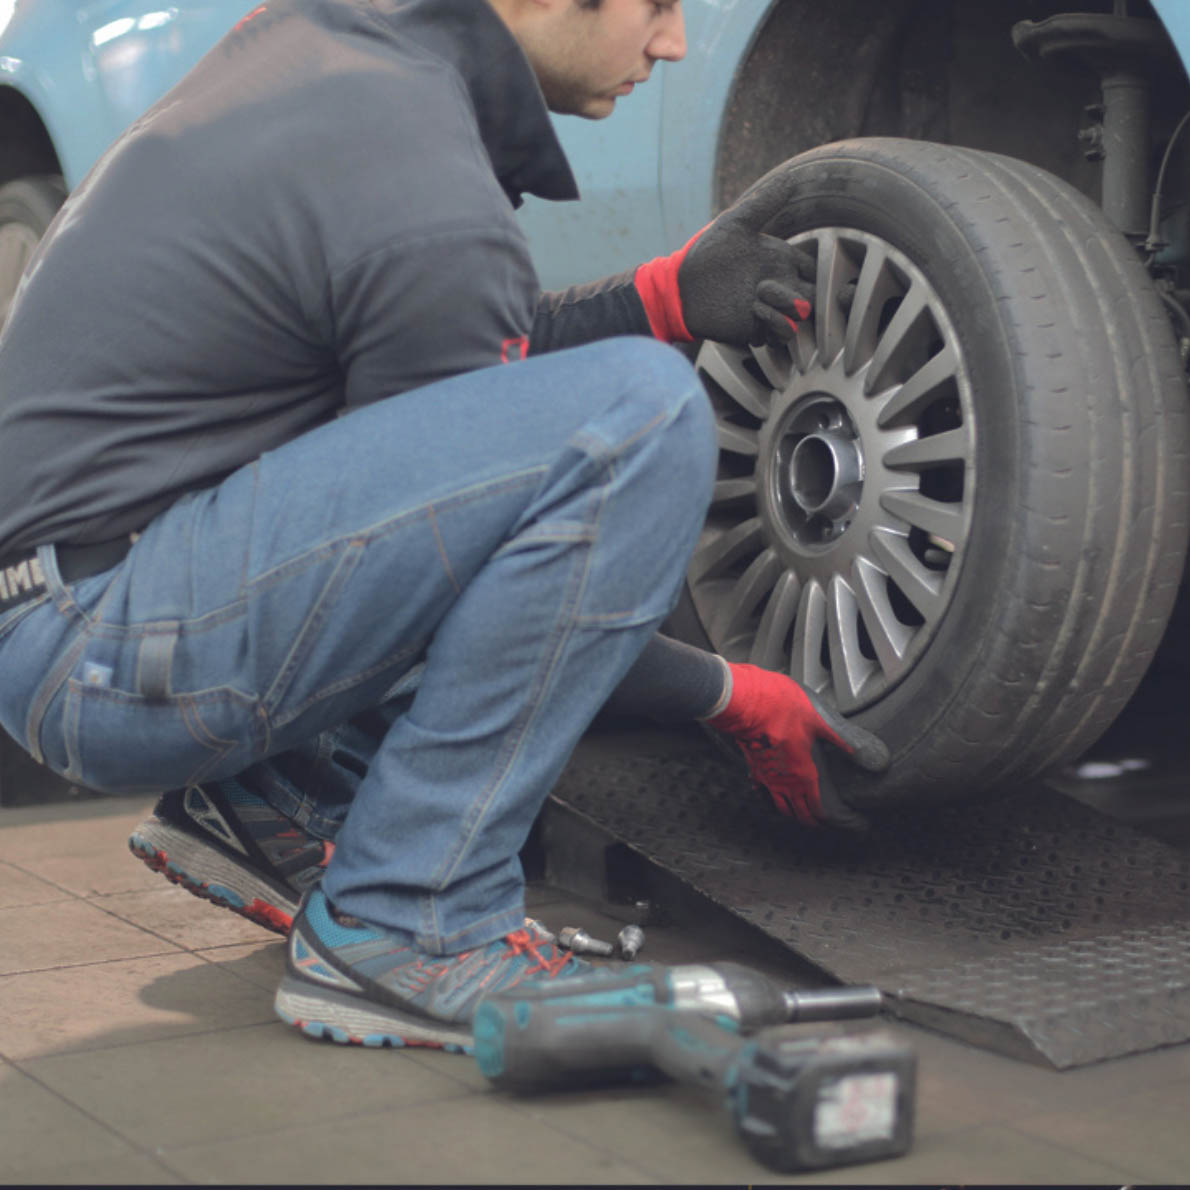 Motor Trade Insurance Policy Customer Gets Tyre Replaced